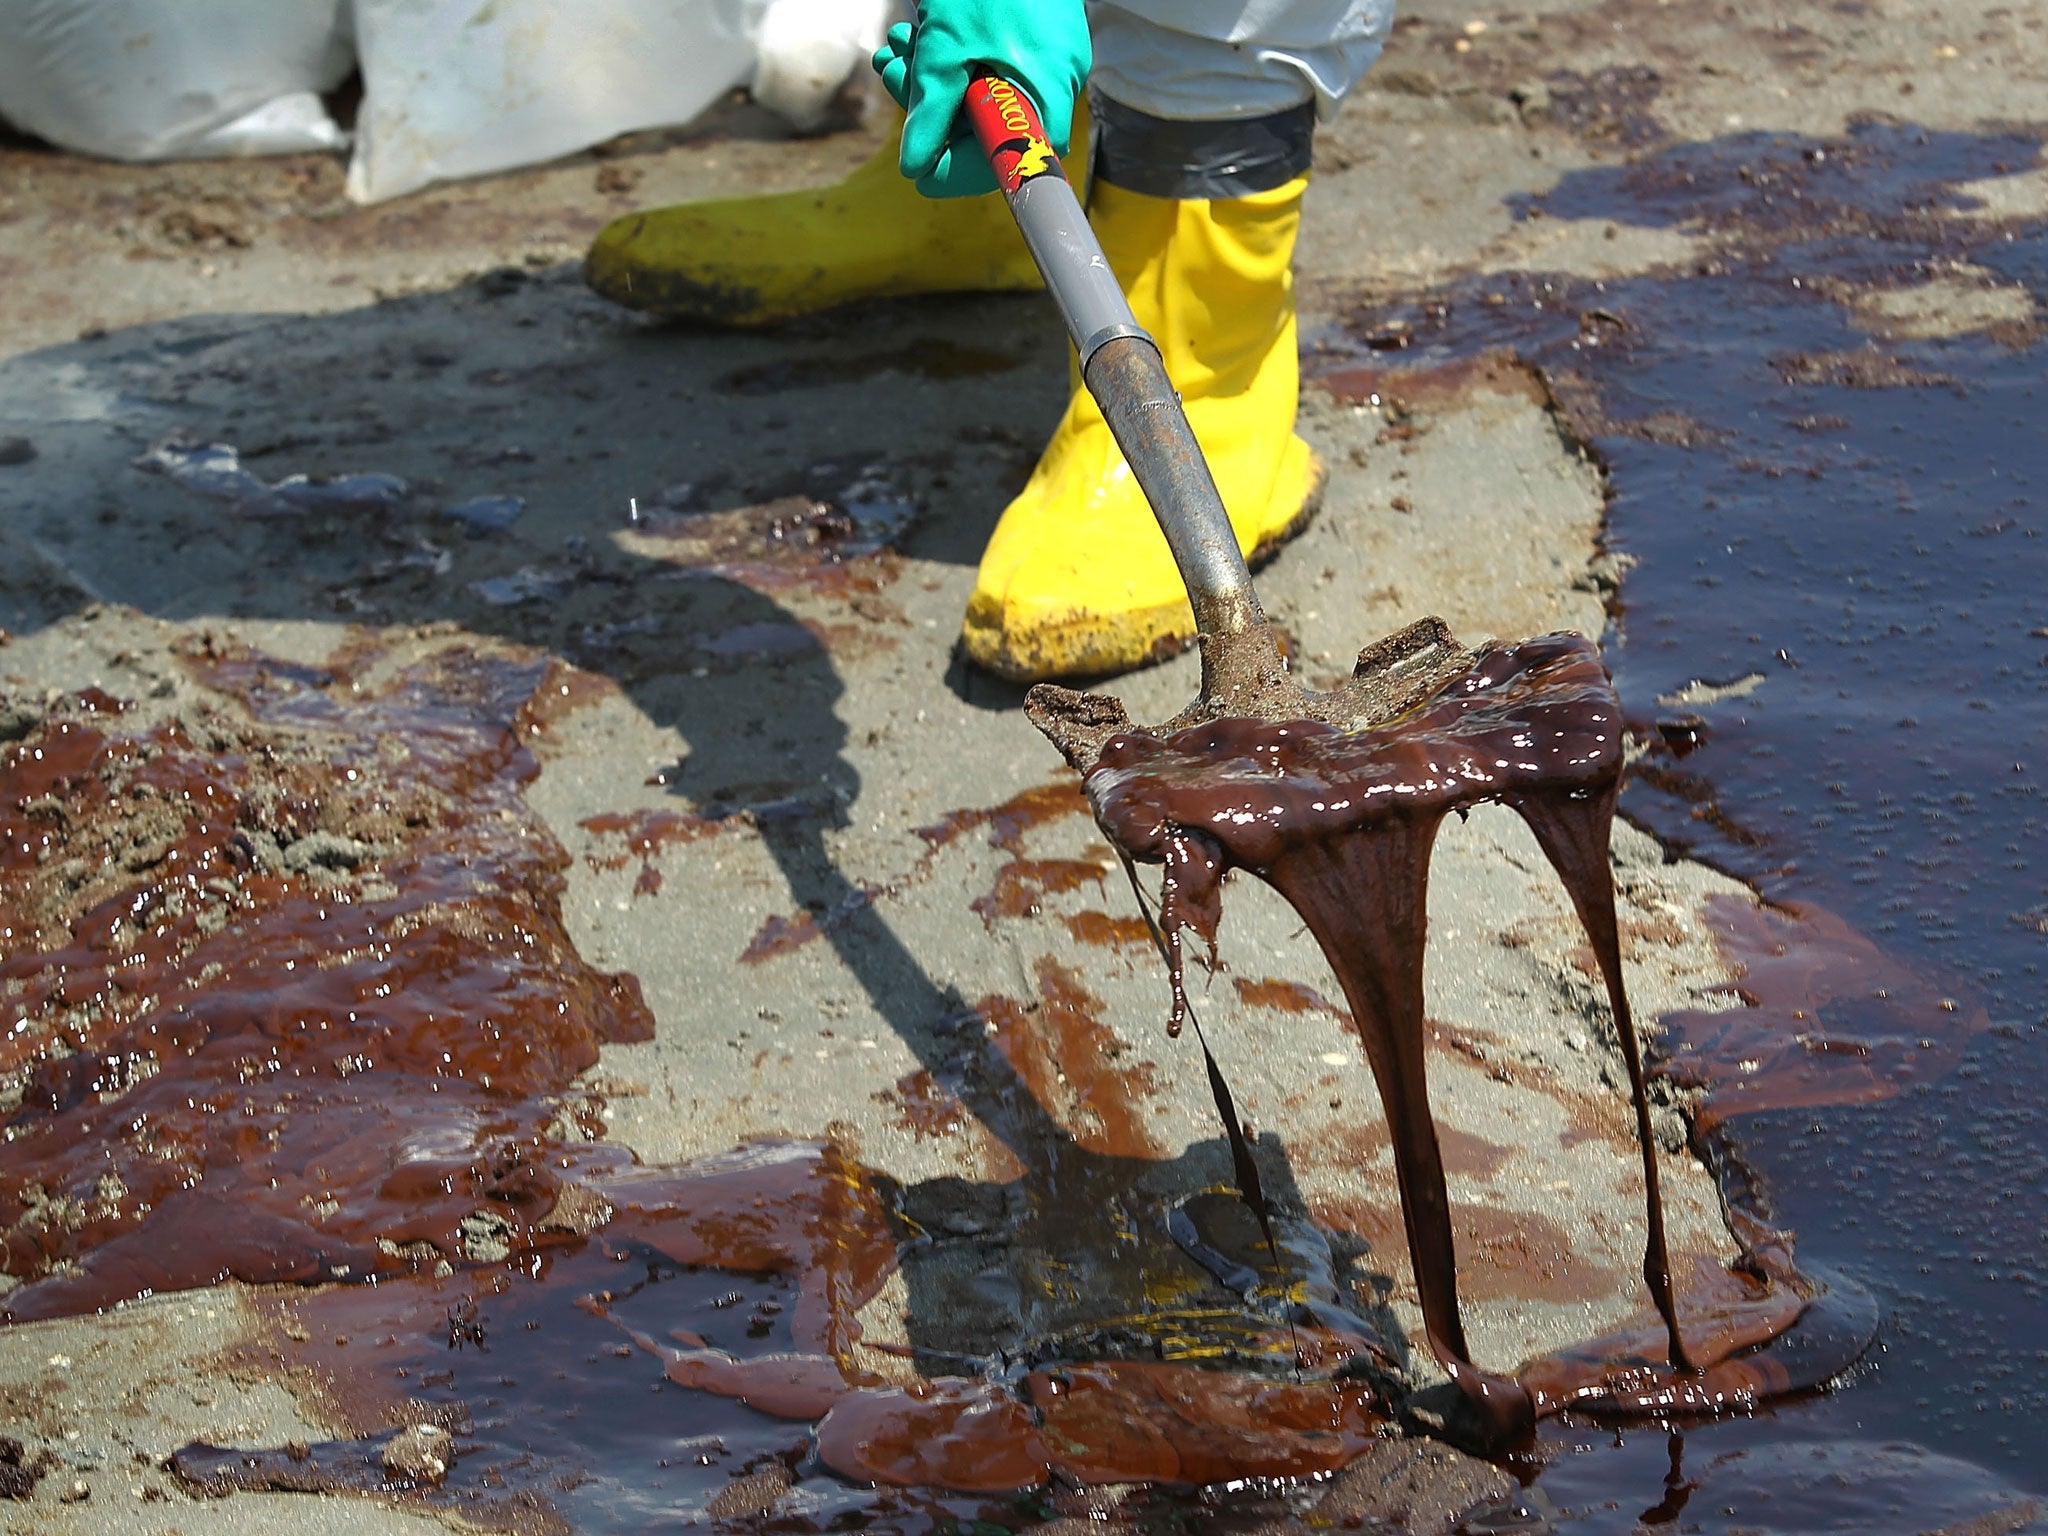 Bp Wins Us Court Reprieve Over Gulf Of Mexico Oil Spill Payments The